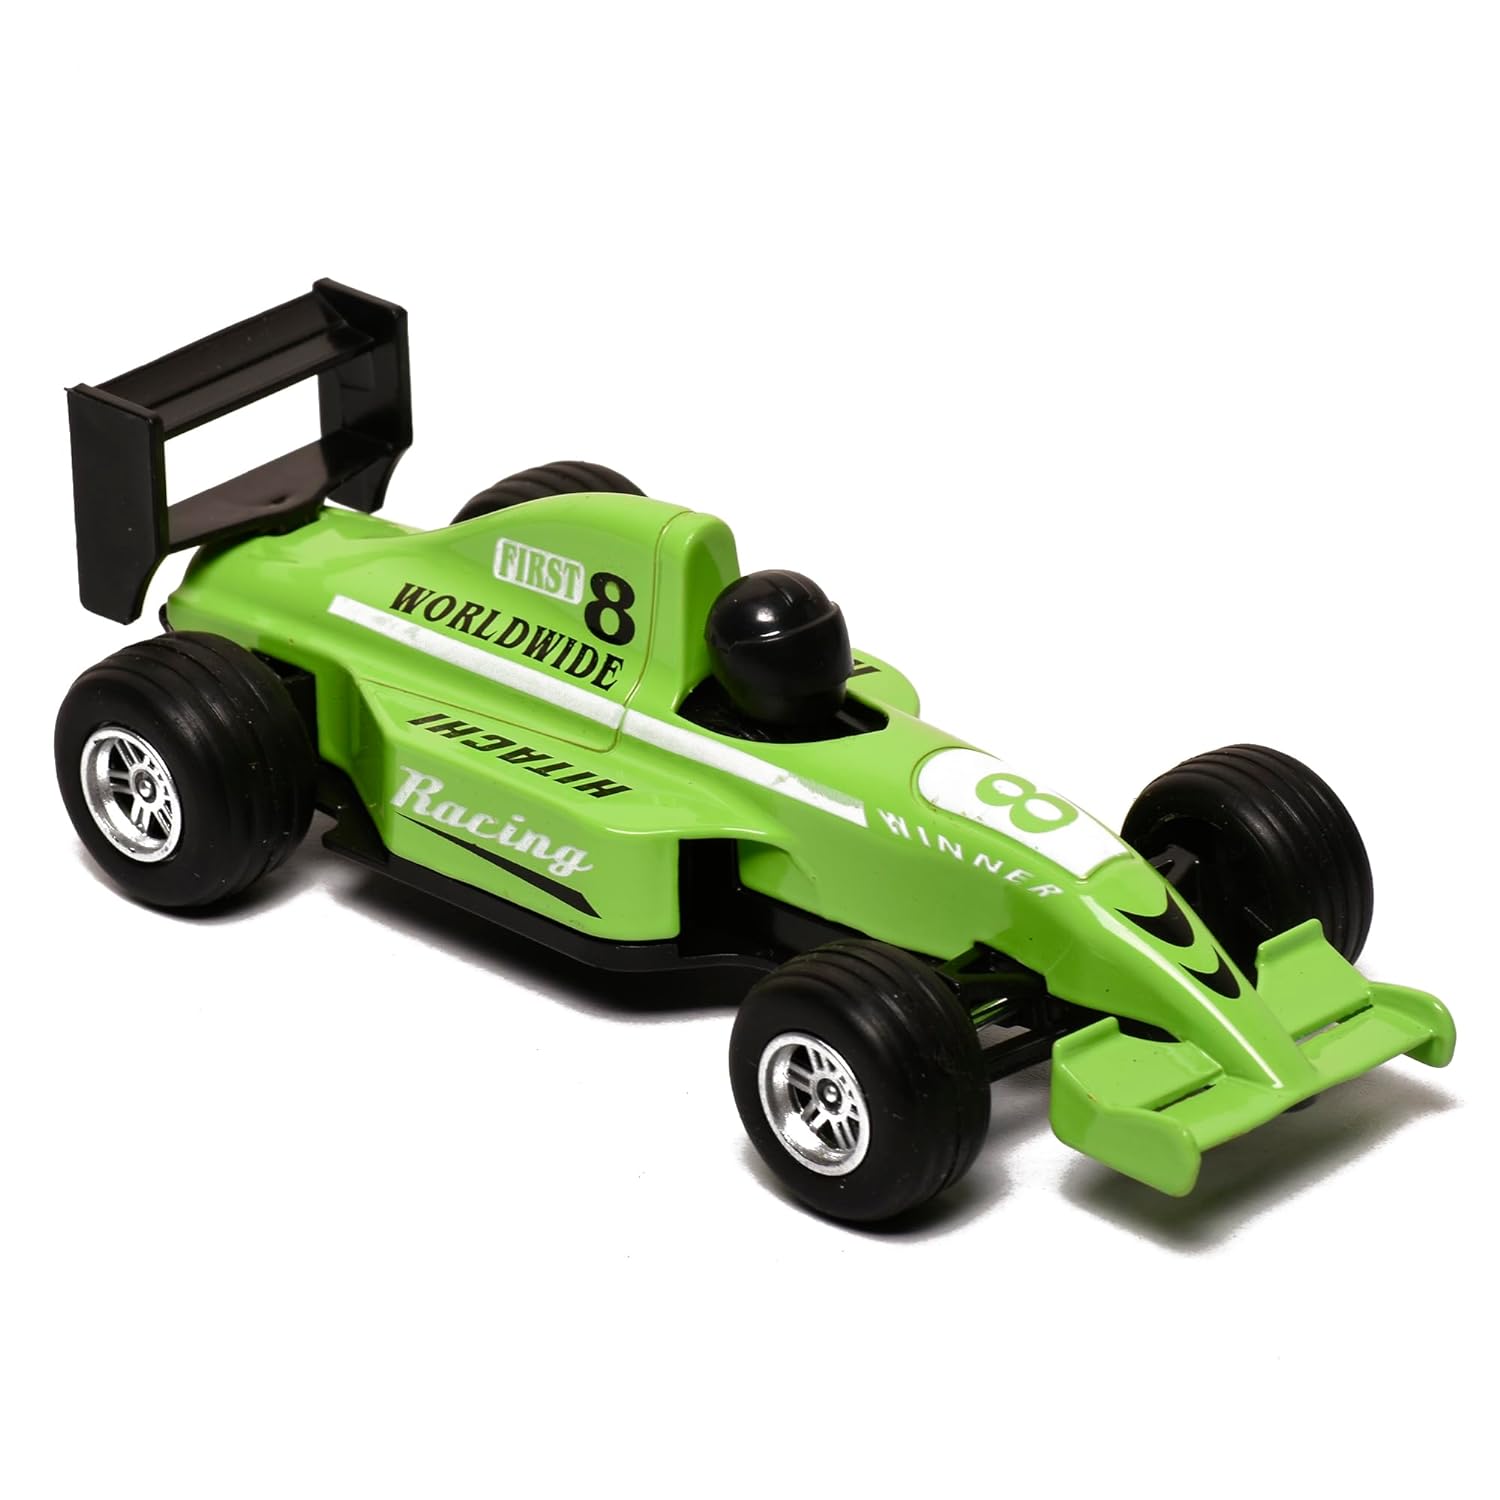 Braintastic Pullback Friction Simulation Model Small Size Racing Car Miniature Vehicle Toys for Kids Age 3 + (Green)